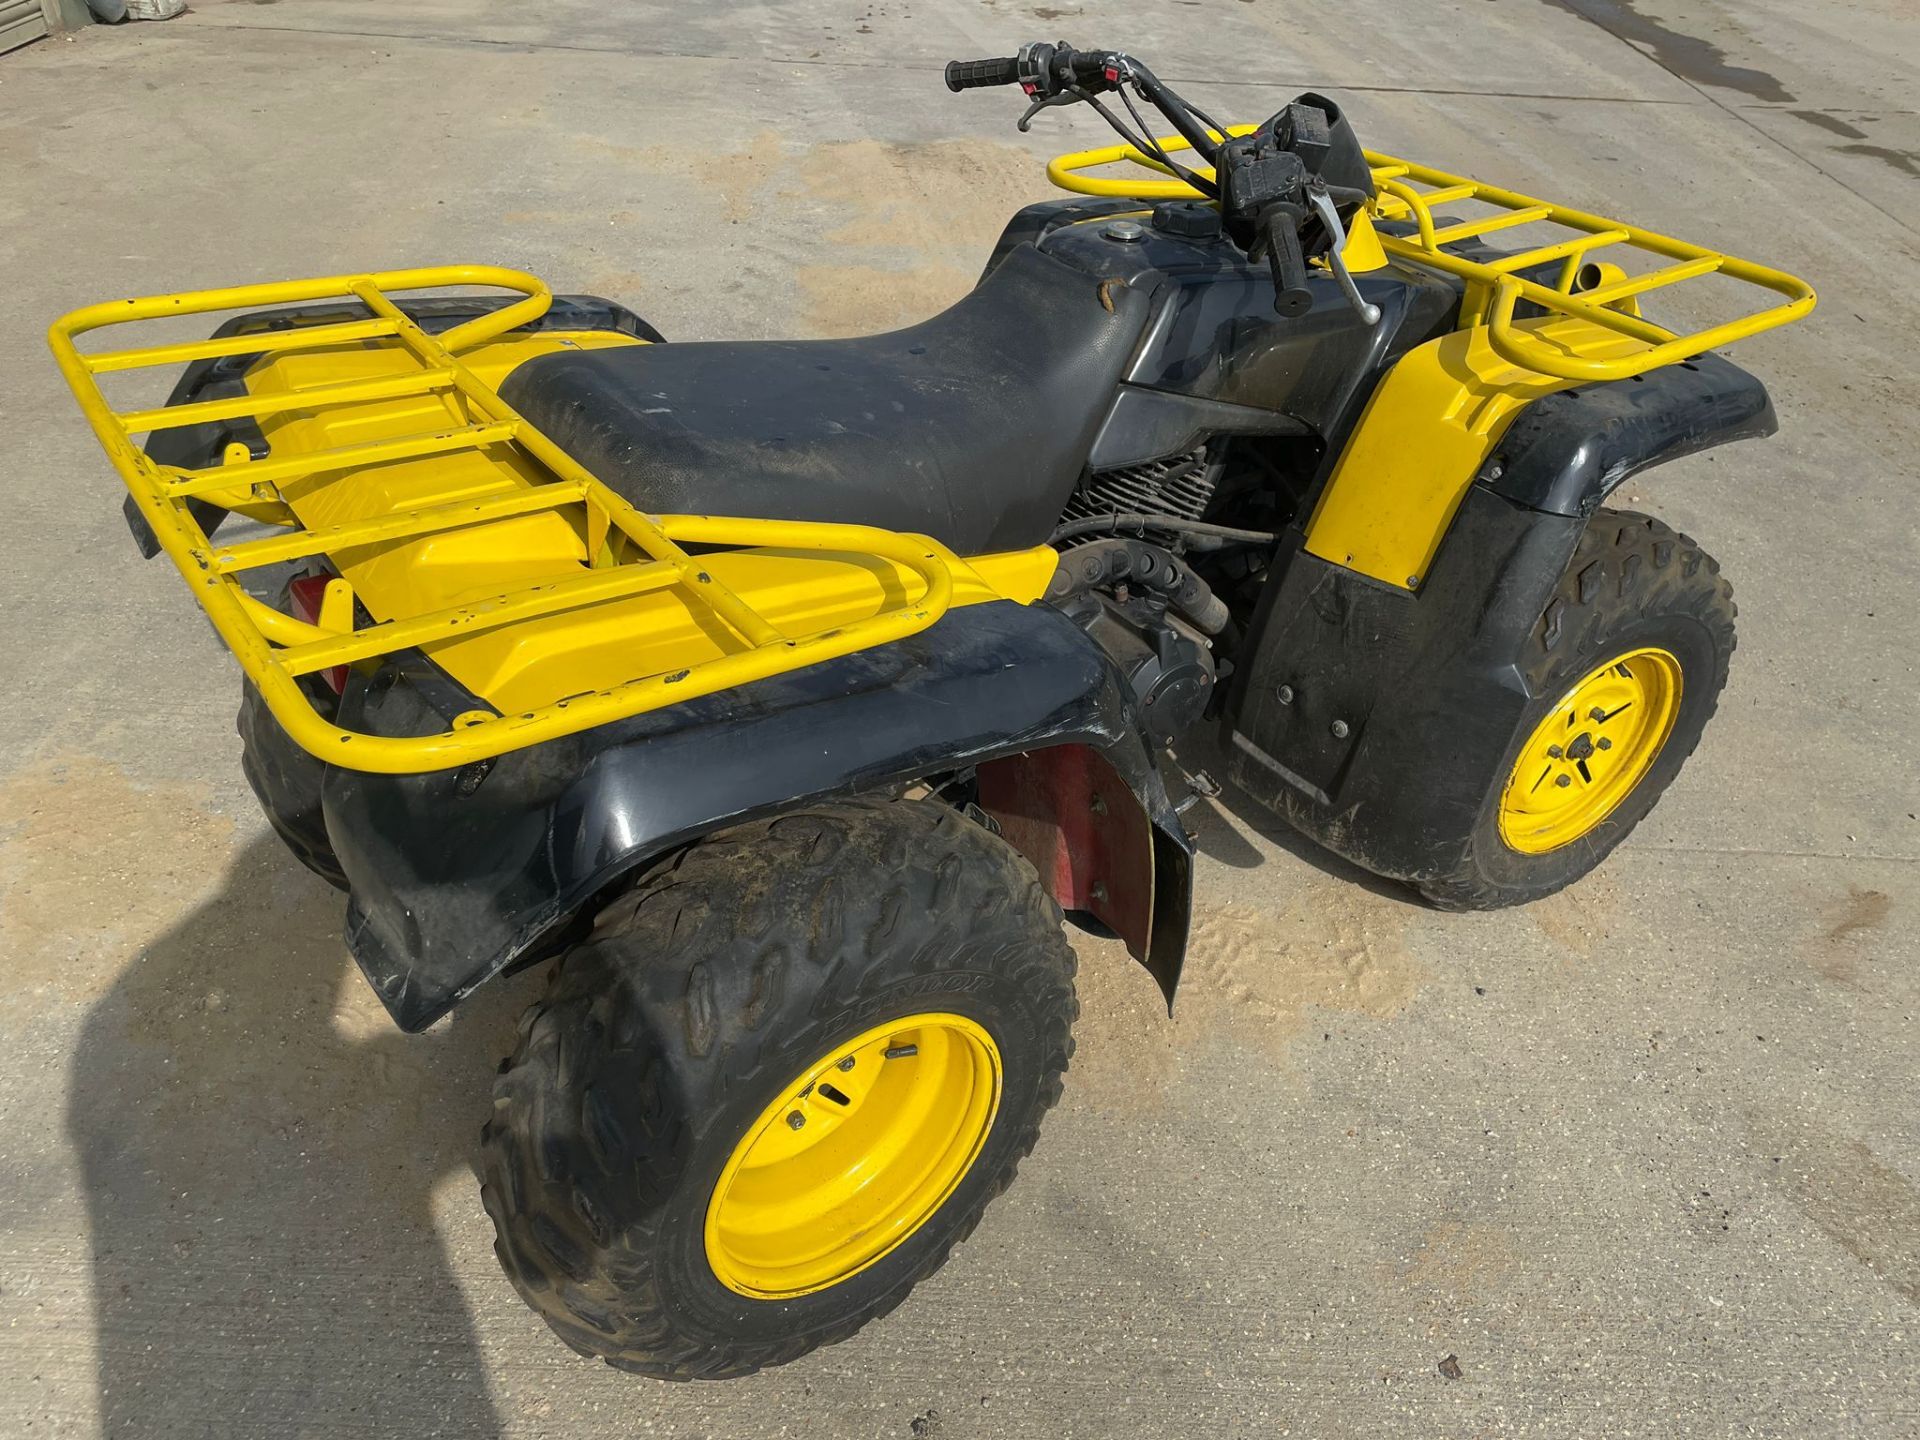 Yamaha Electric & Pull start Quad Bike, includes tow bar - Image 7 of 12